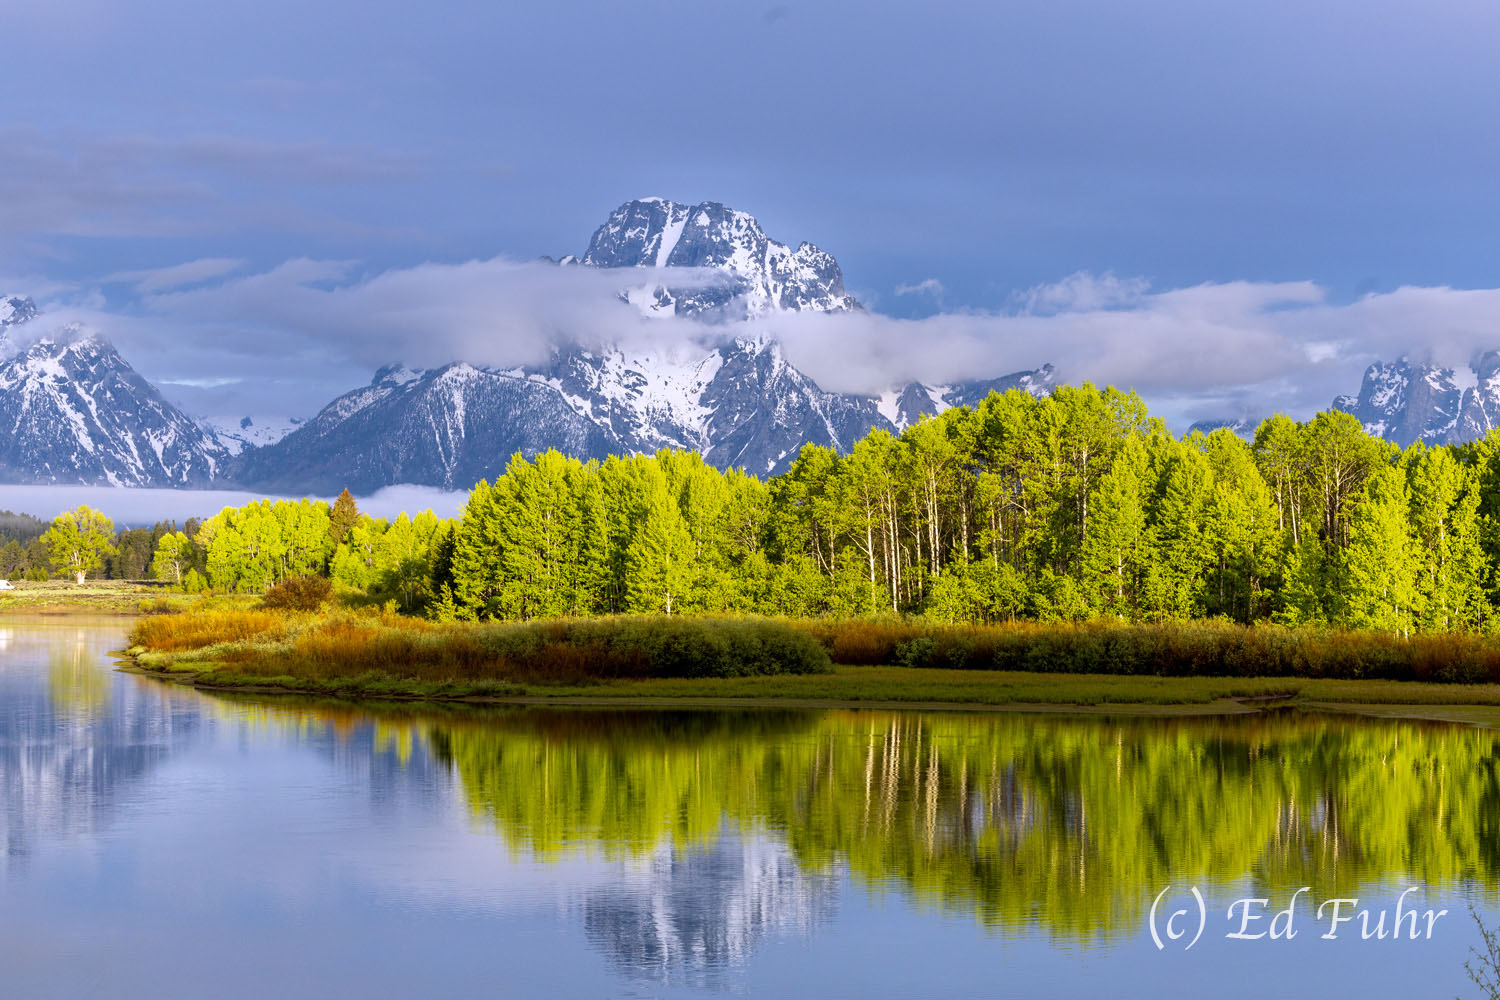 The early green leaves of late spring seem to glow on the aspen grove that lines the western shore of Oxbow Bend.